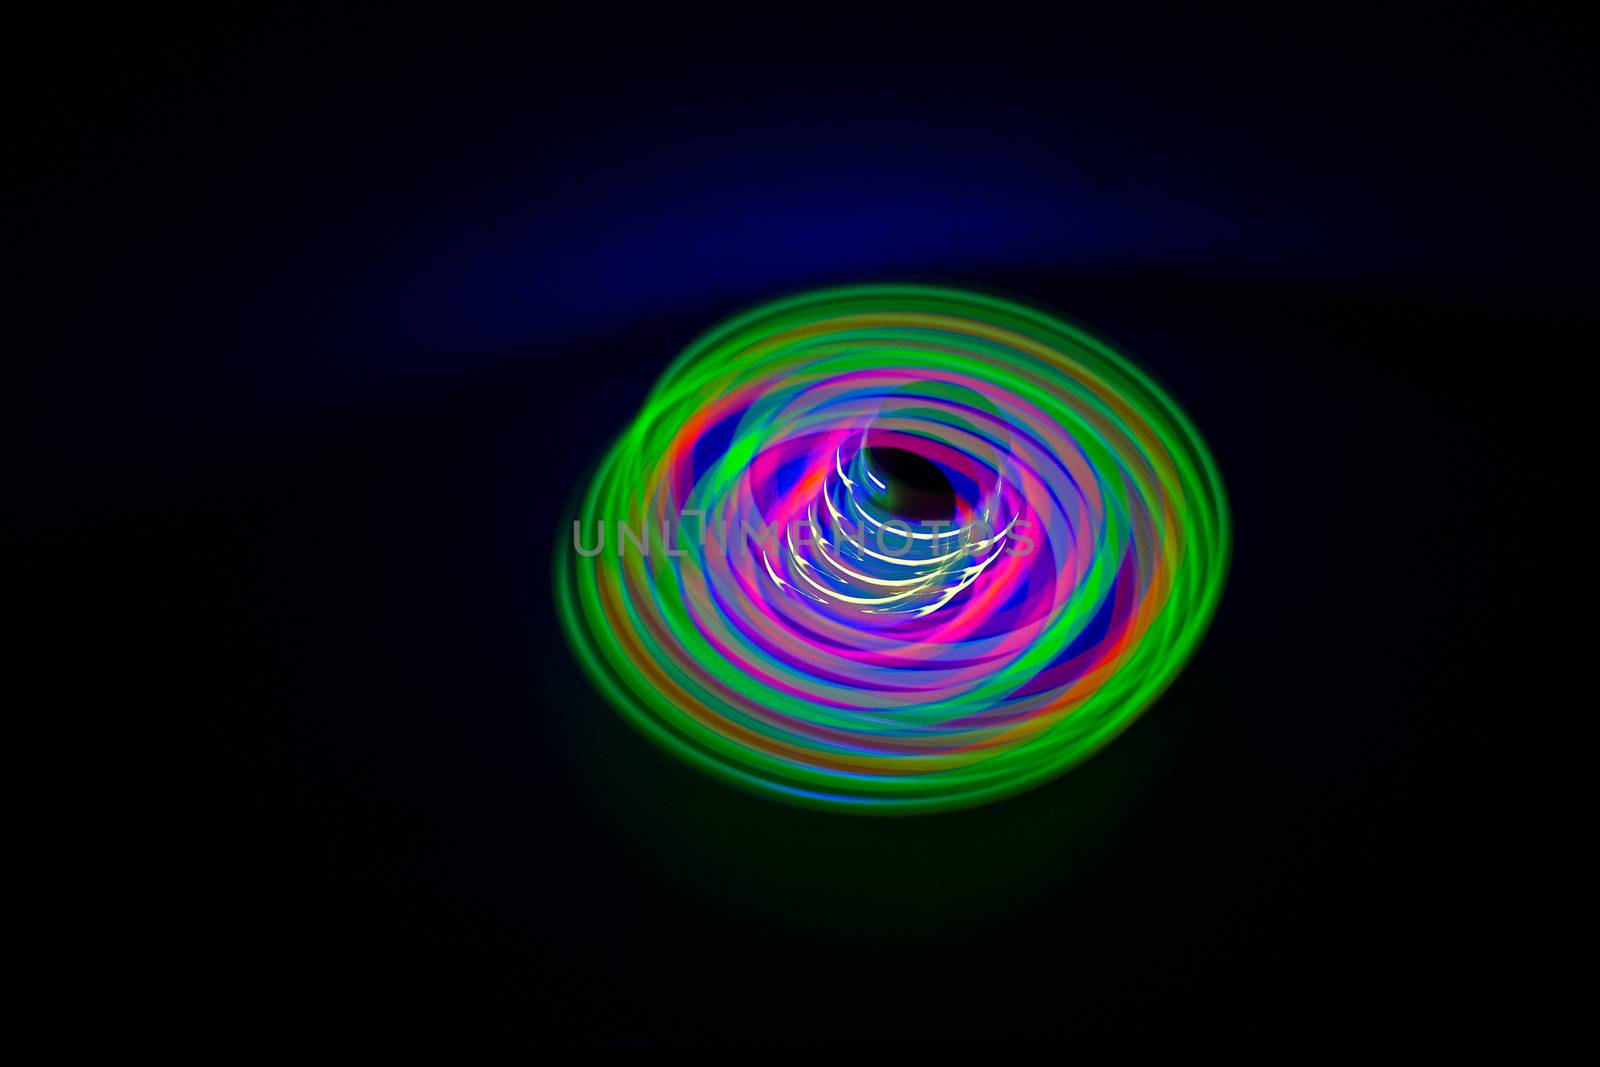 Long exposure, slow shutter, multicolor Led light painting of a spinning top on abstract dark black background.